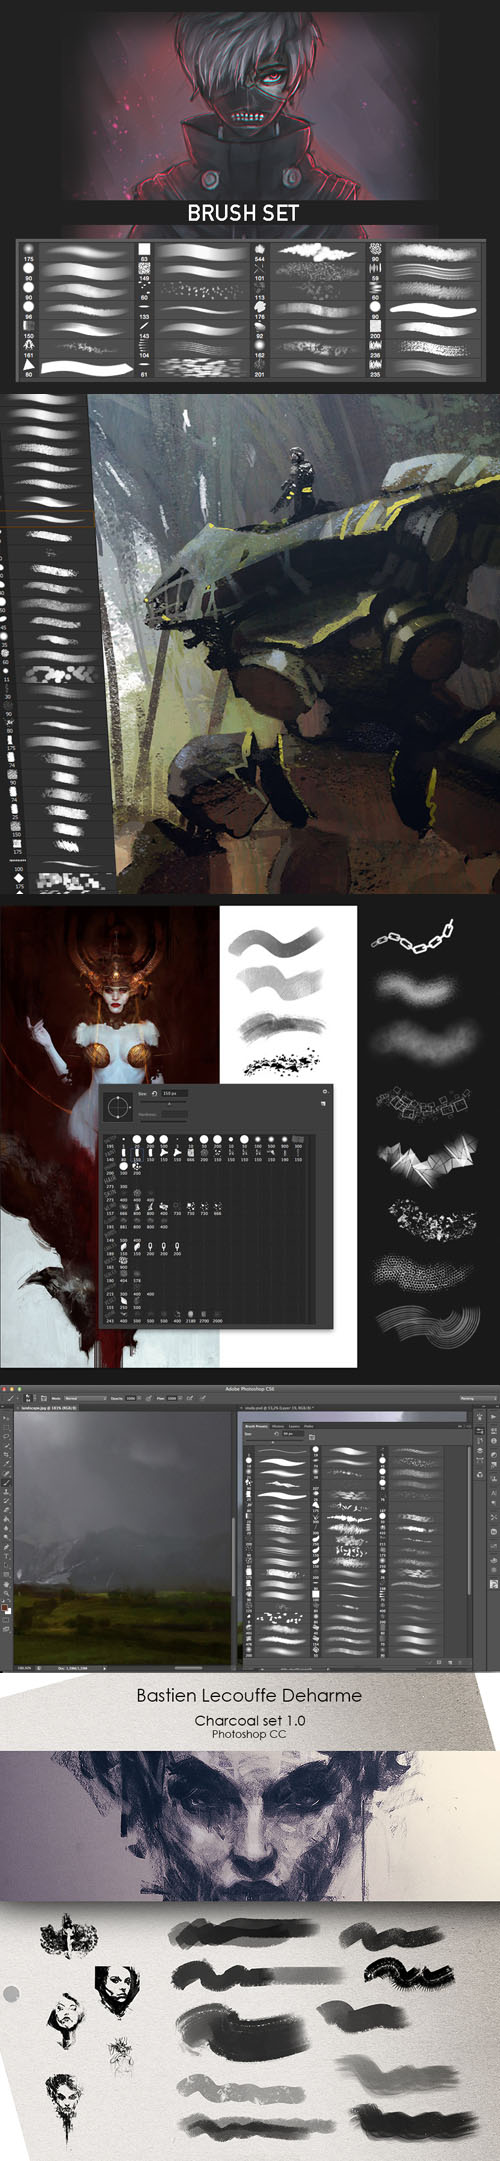 Painting & Drawing Brushes Collection for Photoshop